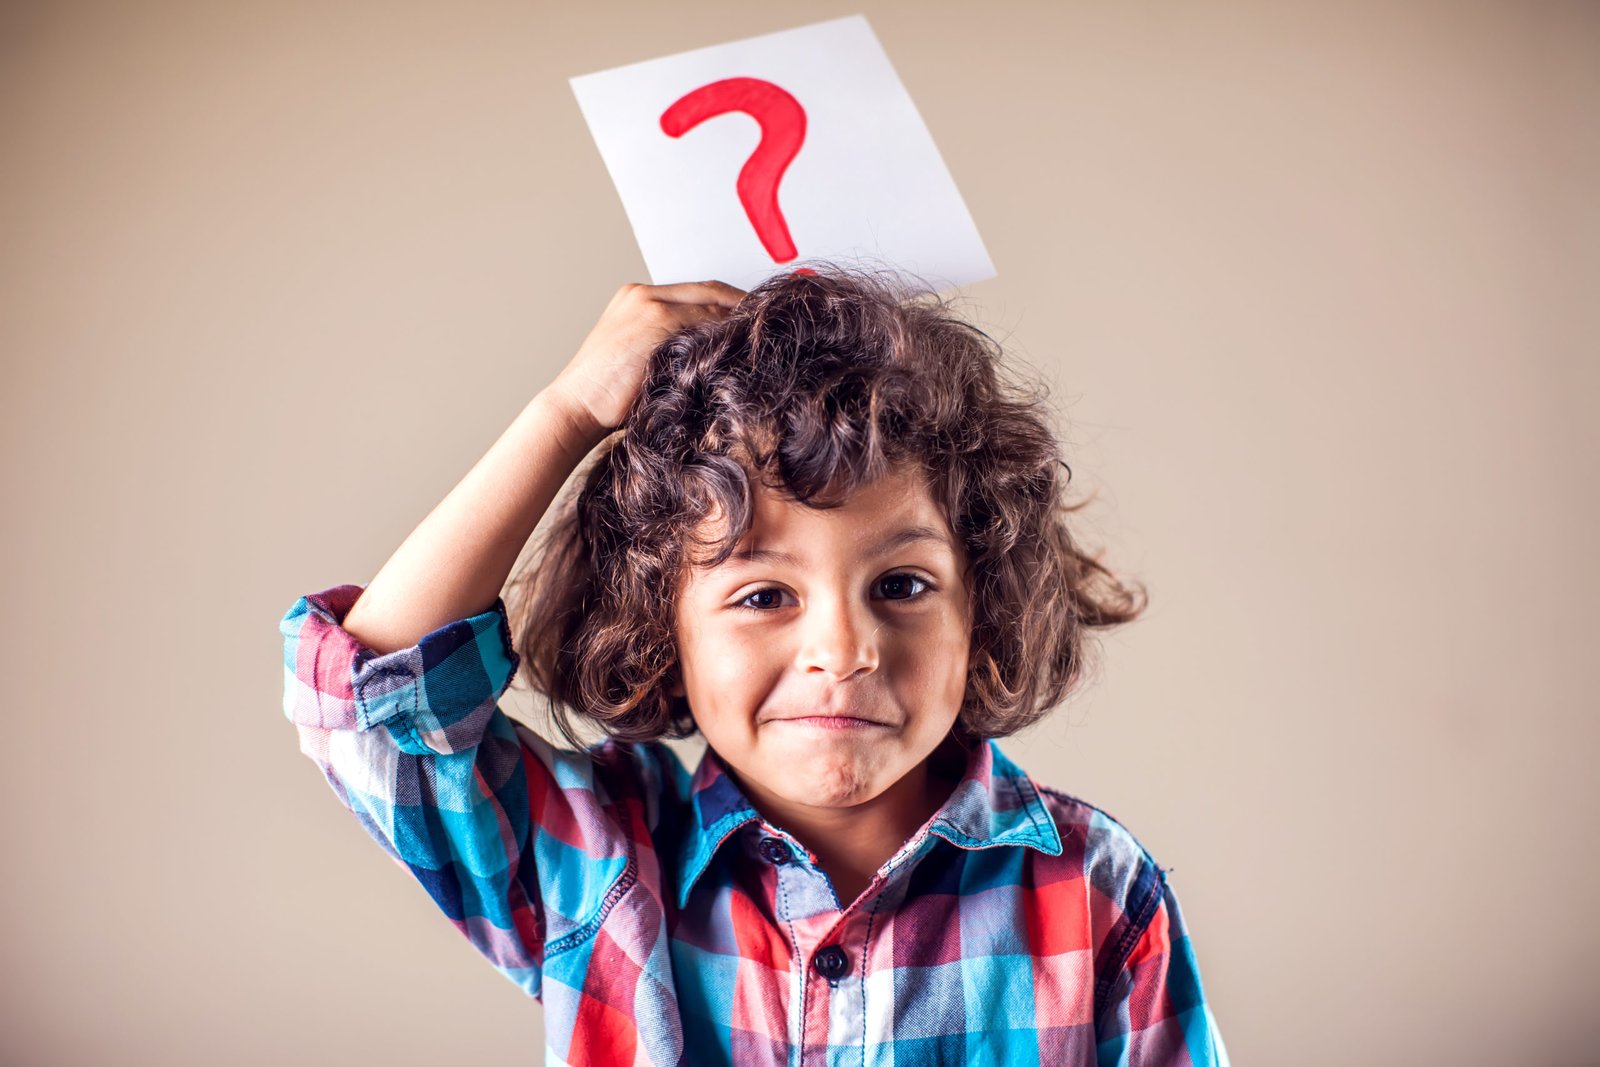 The most exciting childrens questions with suitable answers for parents